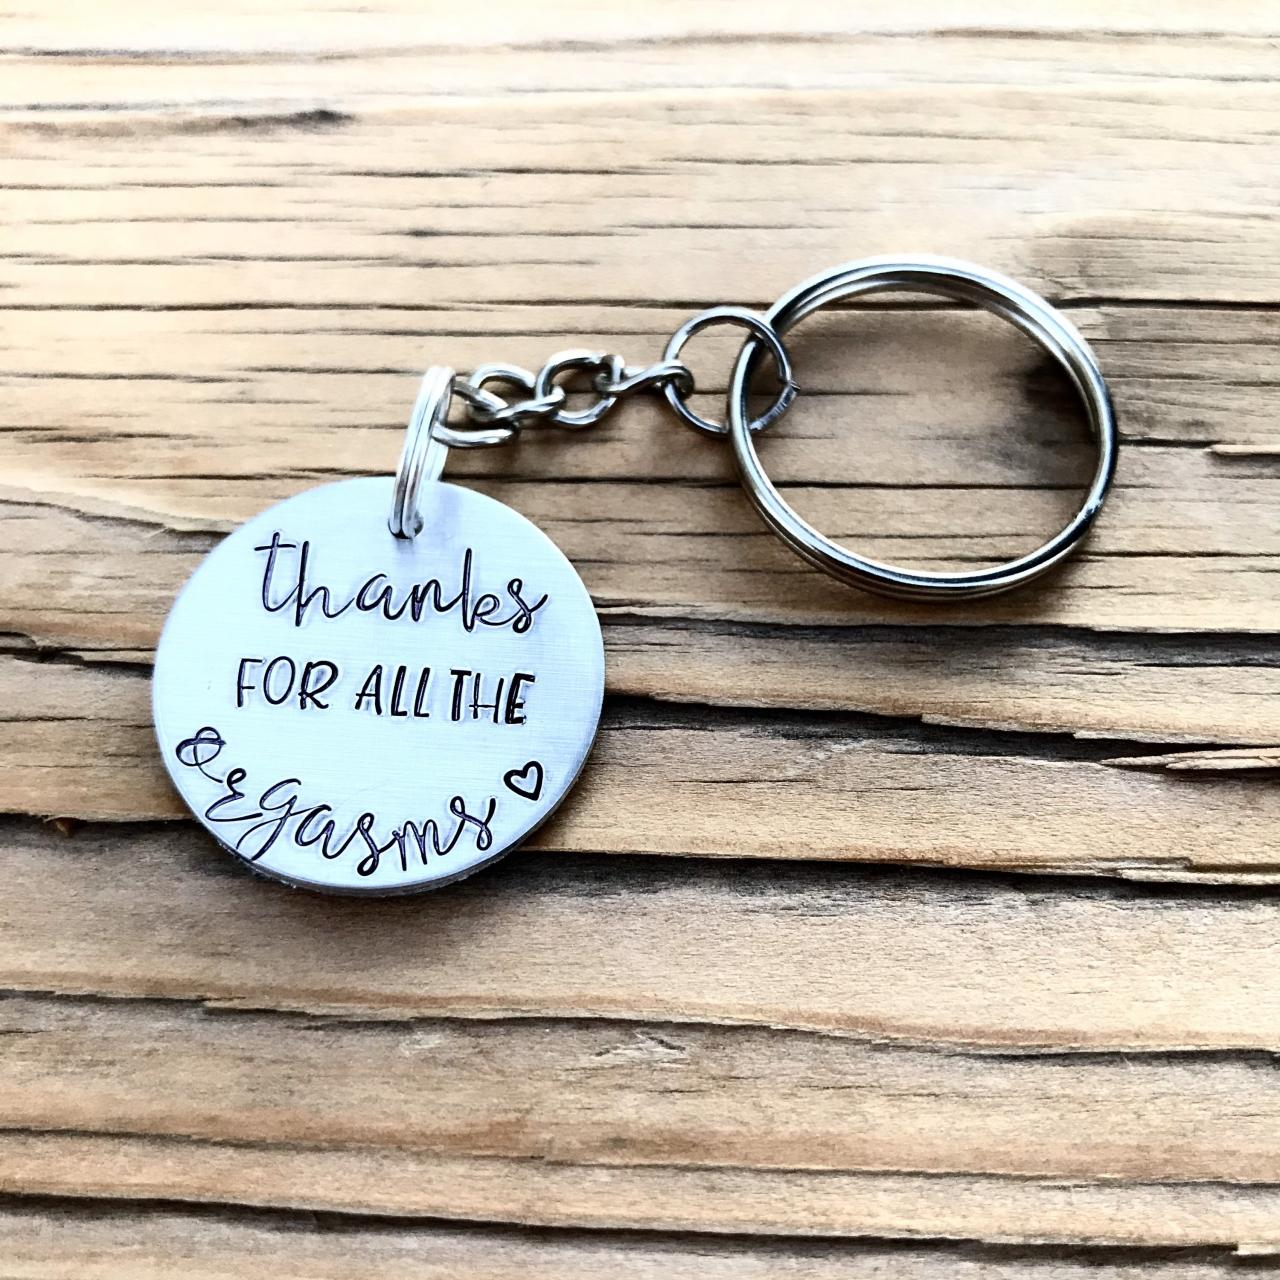 Personalized, Keychain, Dad gift, husband gift, wife gift, girlfriend gift, boyfriend gift, Thanks for all the orgasms.